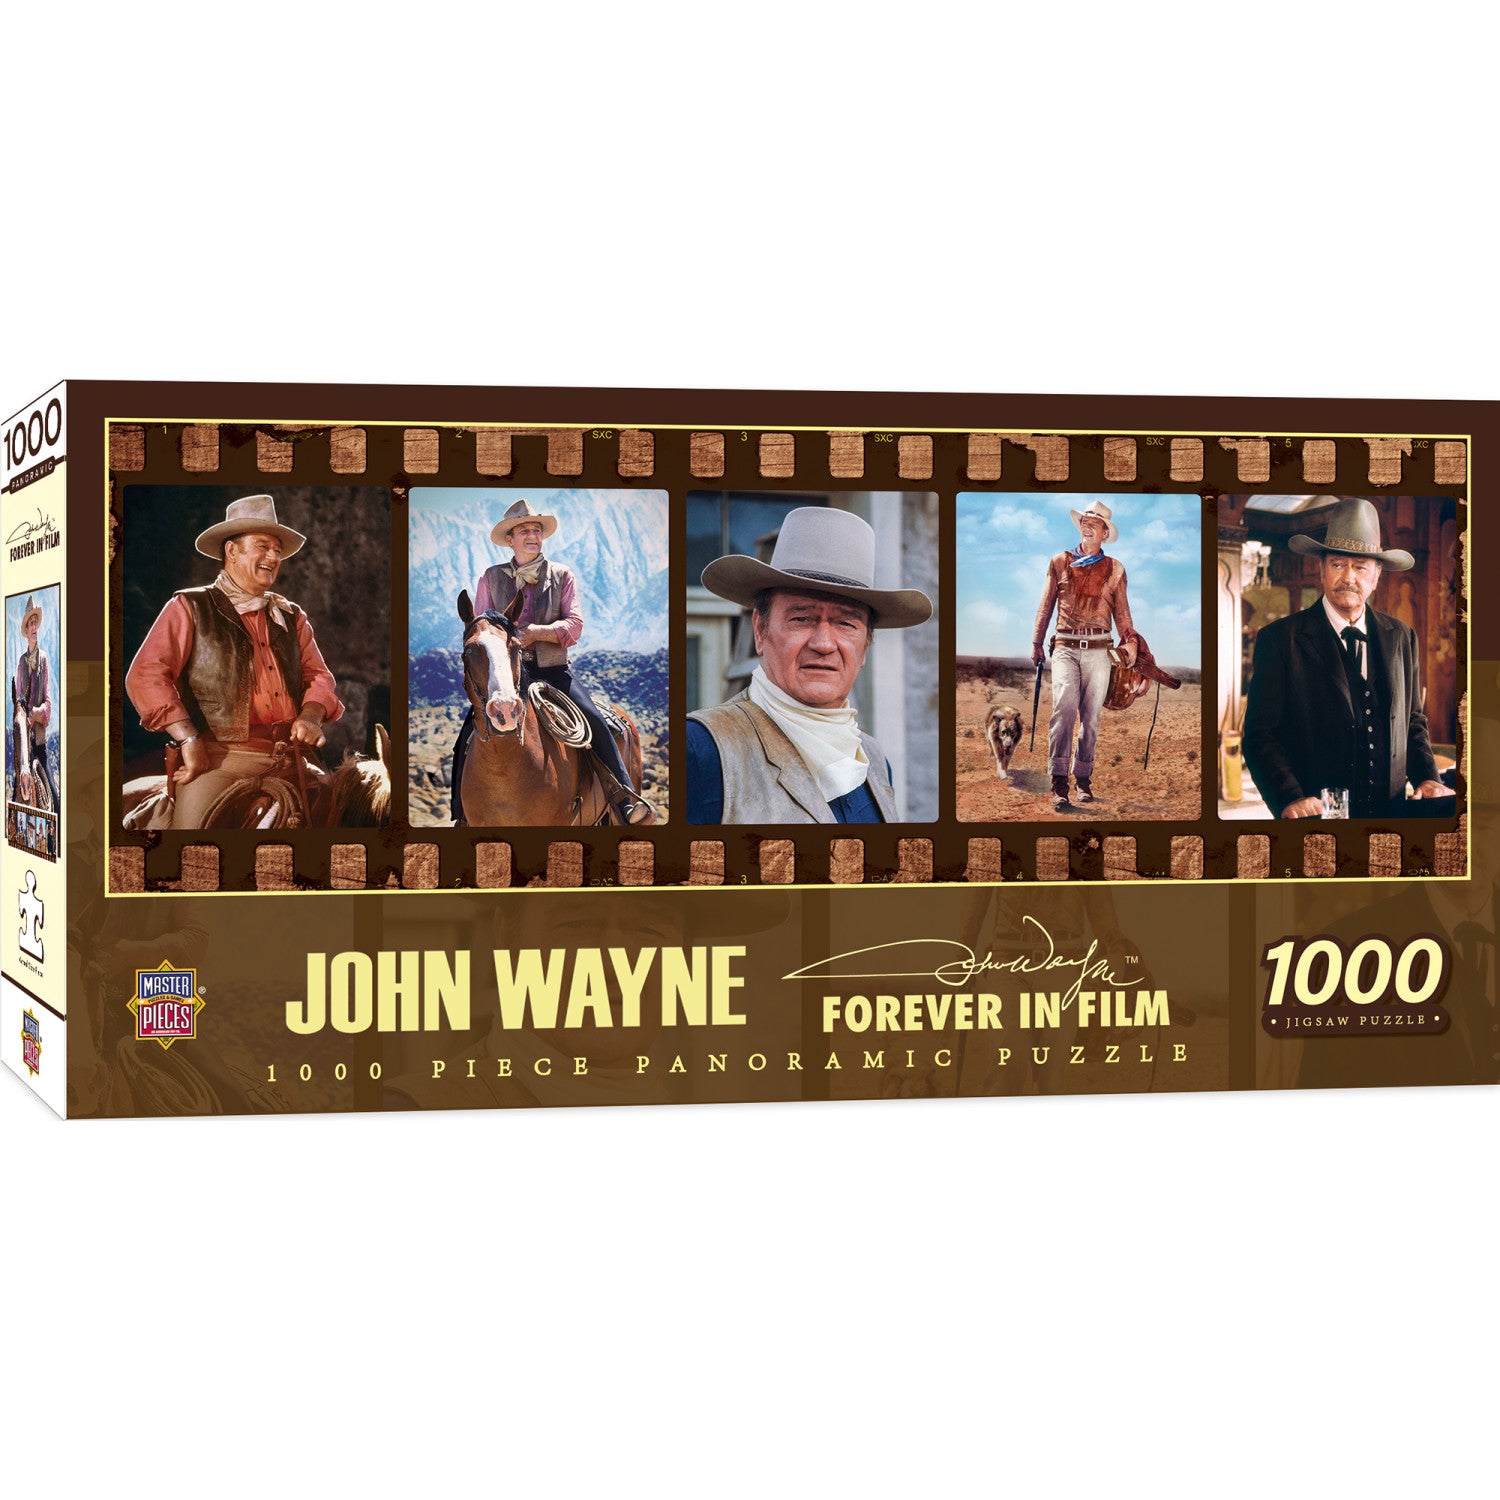 Panoramic Collectible - John Wayne Forever in Film 1000 Piece Puzzle